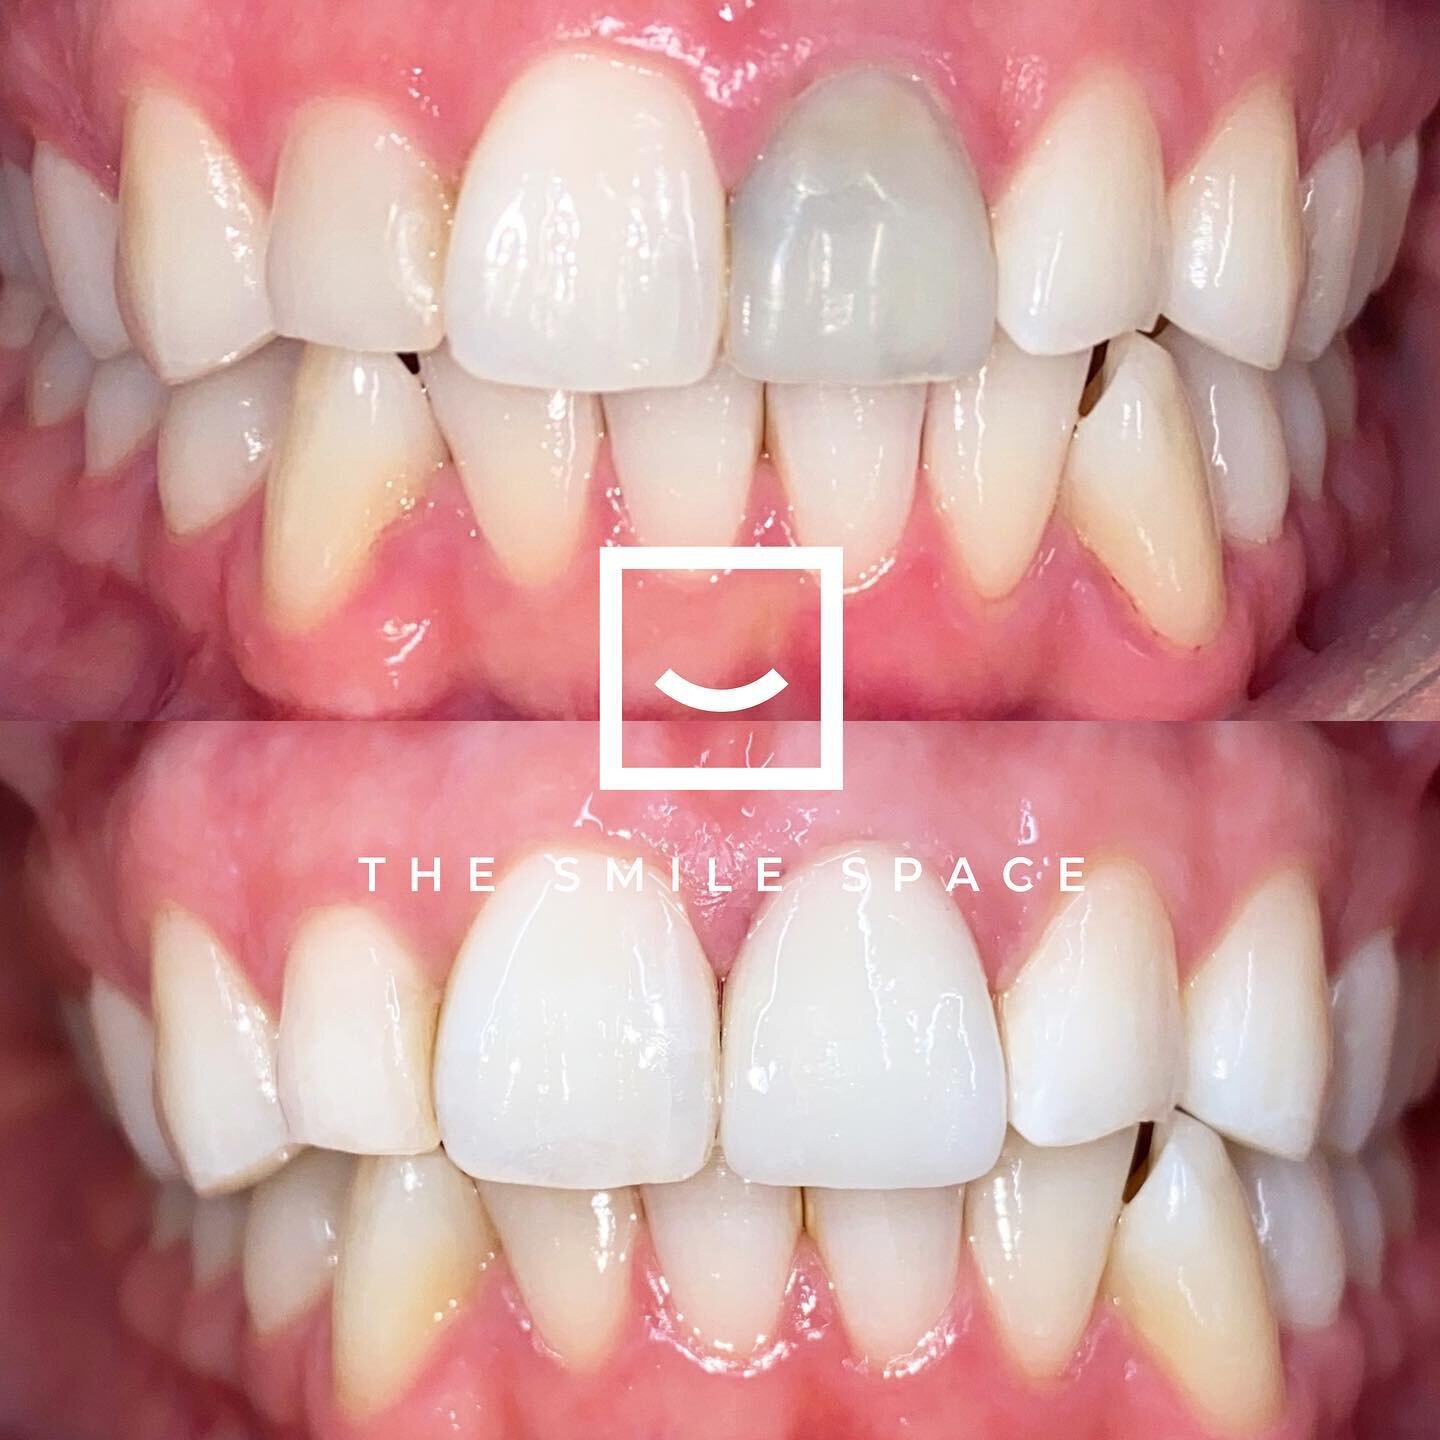 One of the most challenging procedures in #cosmeticdentistry is to restore a #singleunit anterior tooth. It often requires a lot more planning and effort to mimic nature. In this case, our efforts definitely paid off!
.
.
.
#seattledentist #seattleor